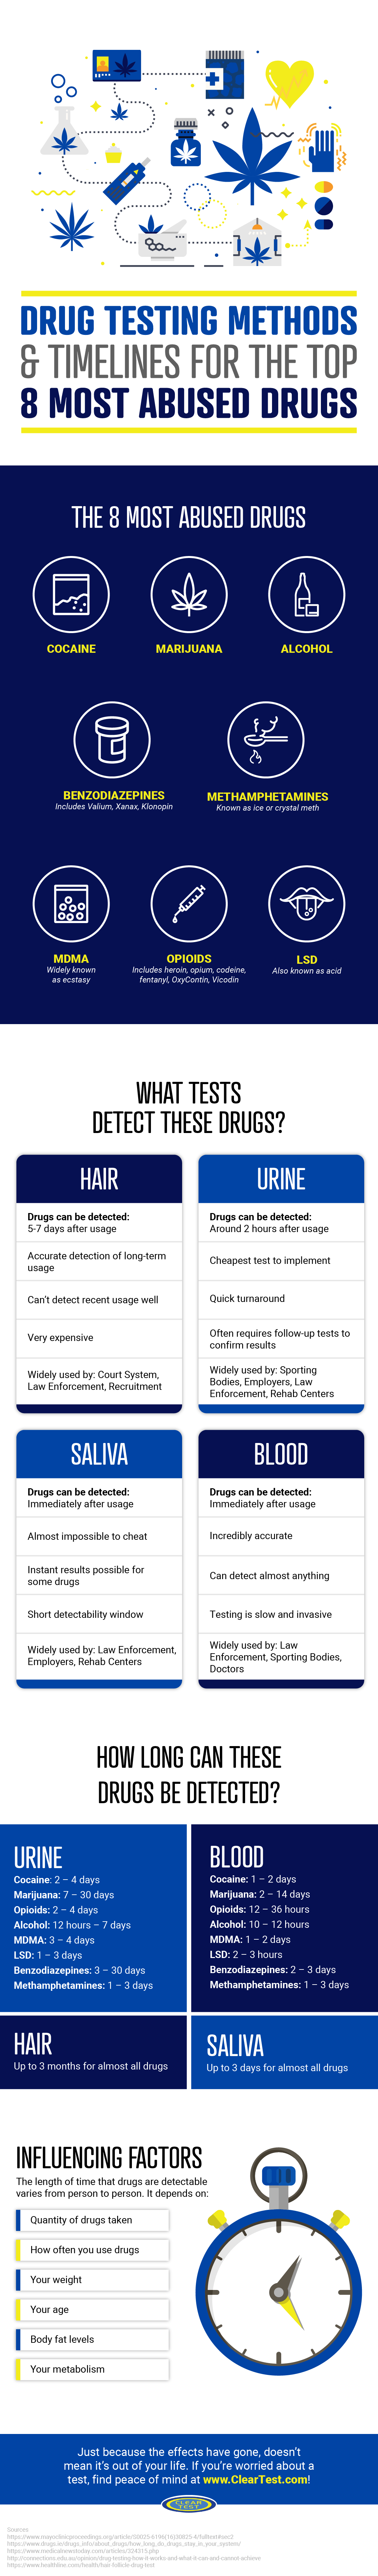 Infographic: Drug Testing Methods & Timelines for the Top 8 Most Abused Drugs